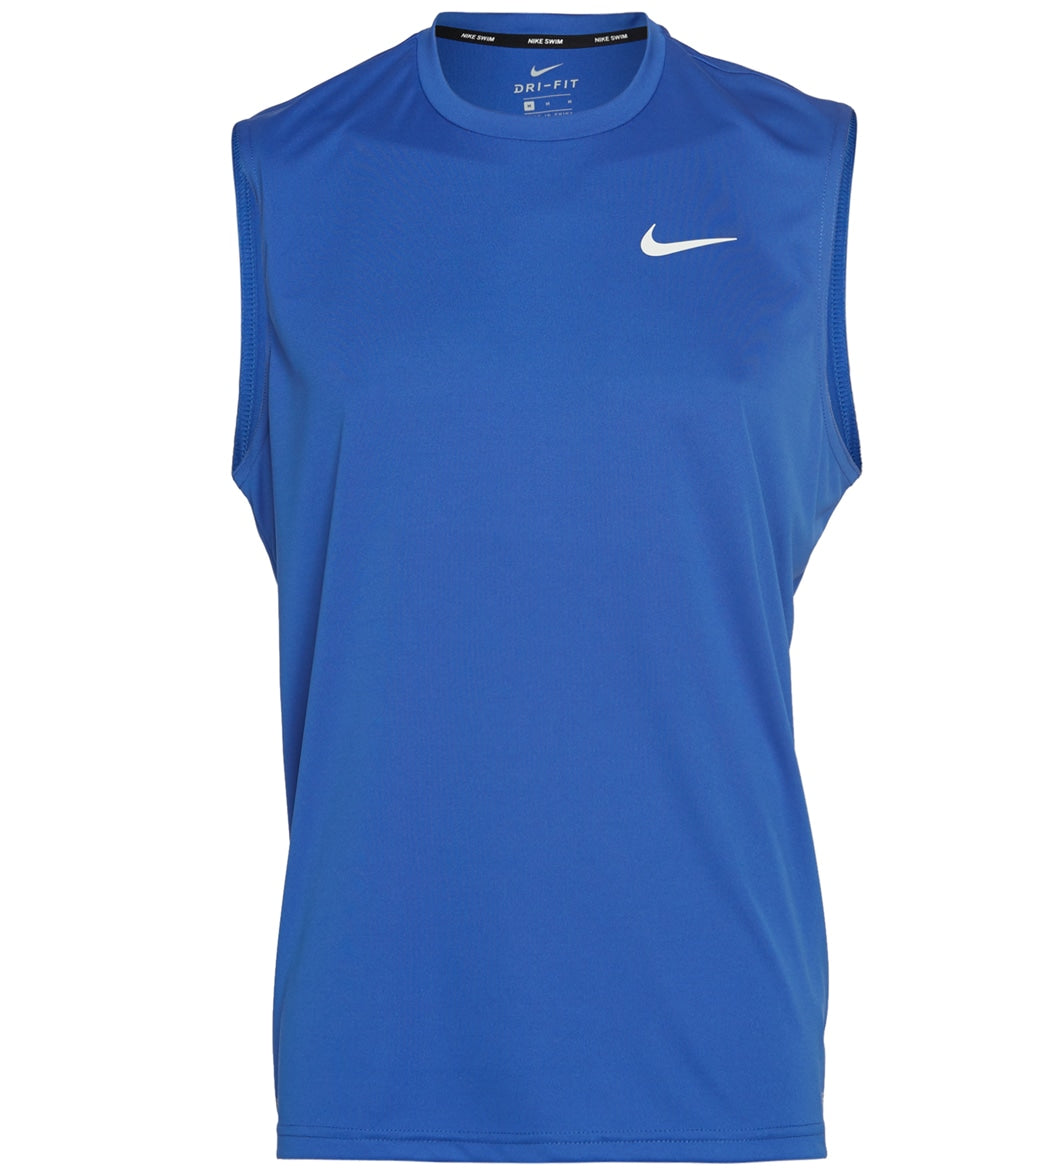 Nike Men's Essential Sleeveless Hydroguard Shirt - Game Royal Large Polyester - Swimoutlet.com